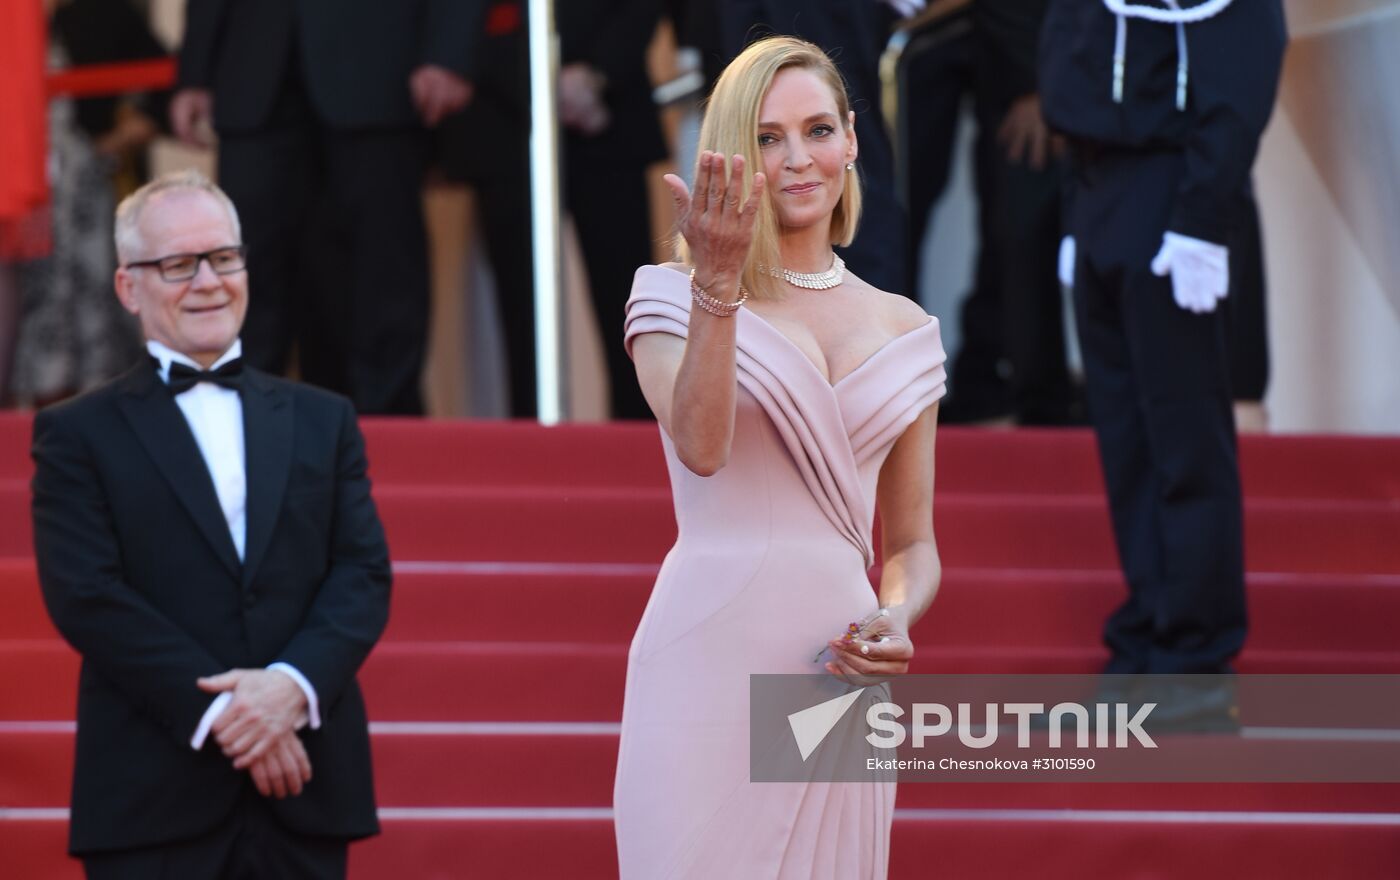 Opening of 70th Cannes Film Festival